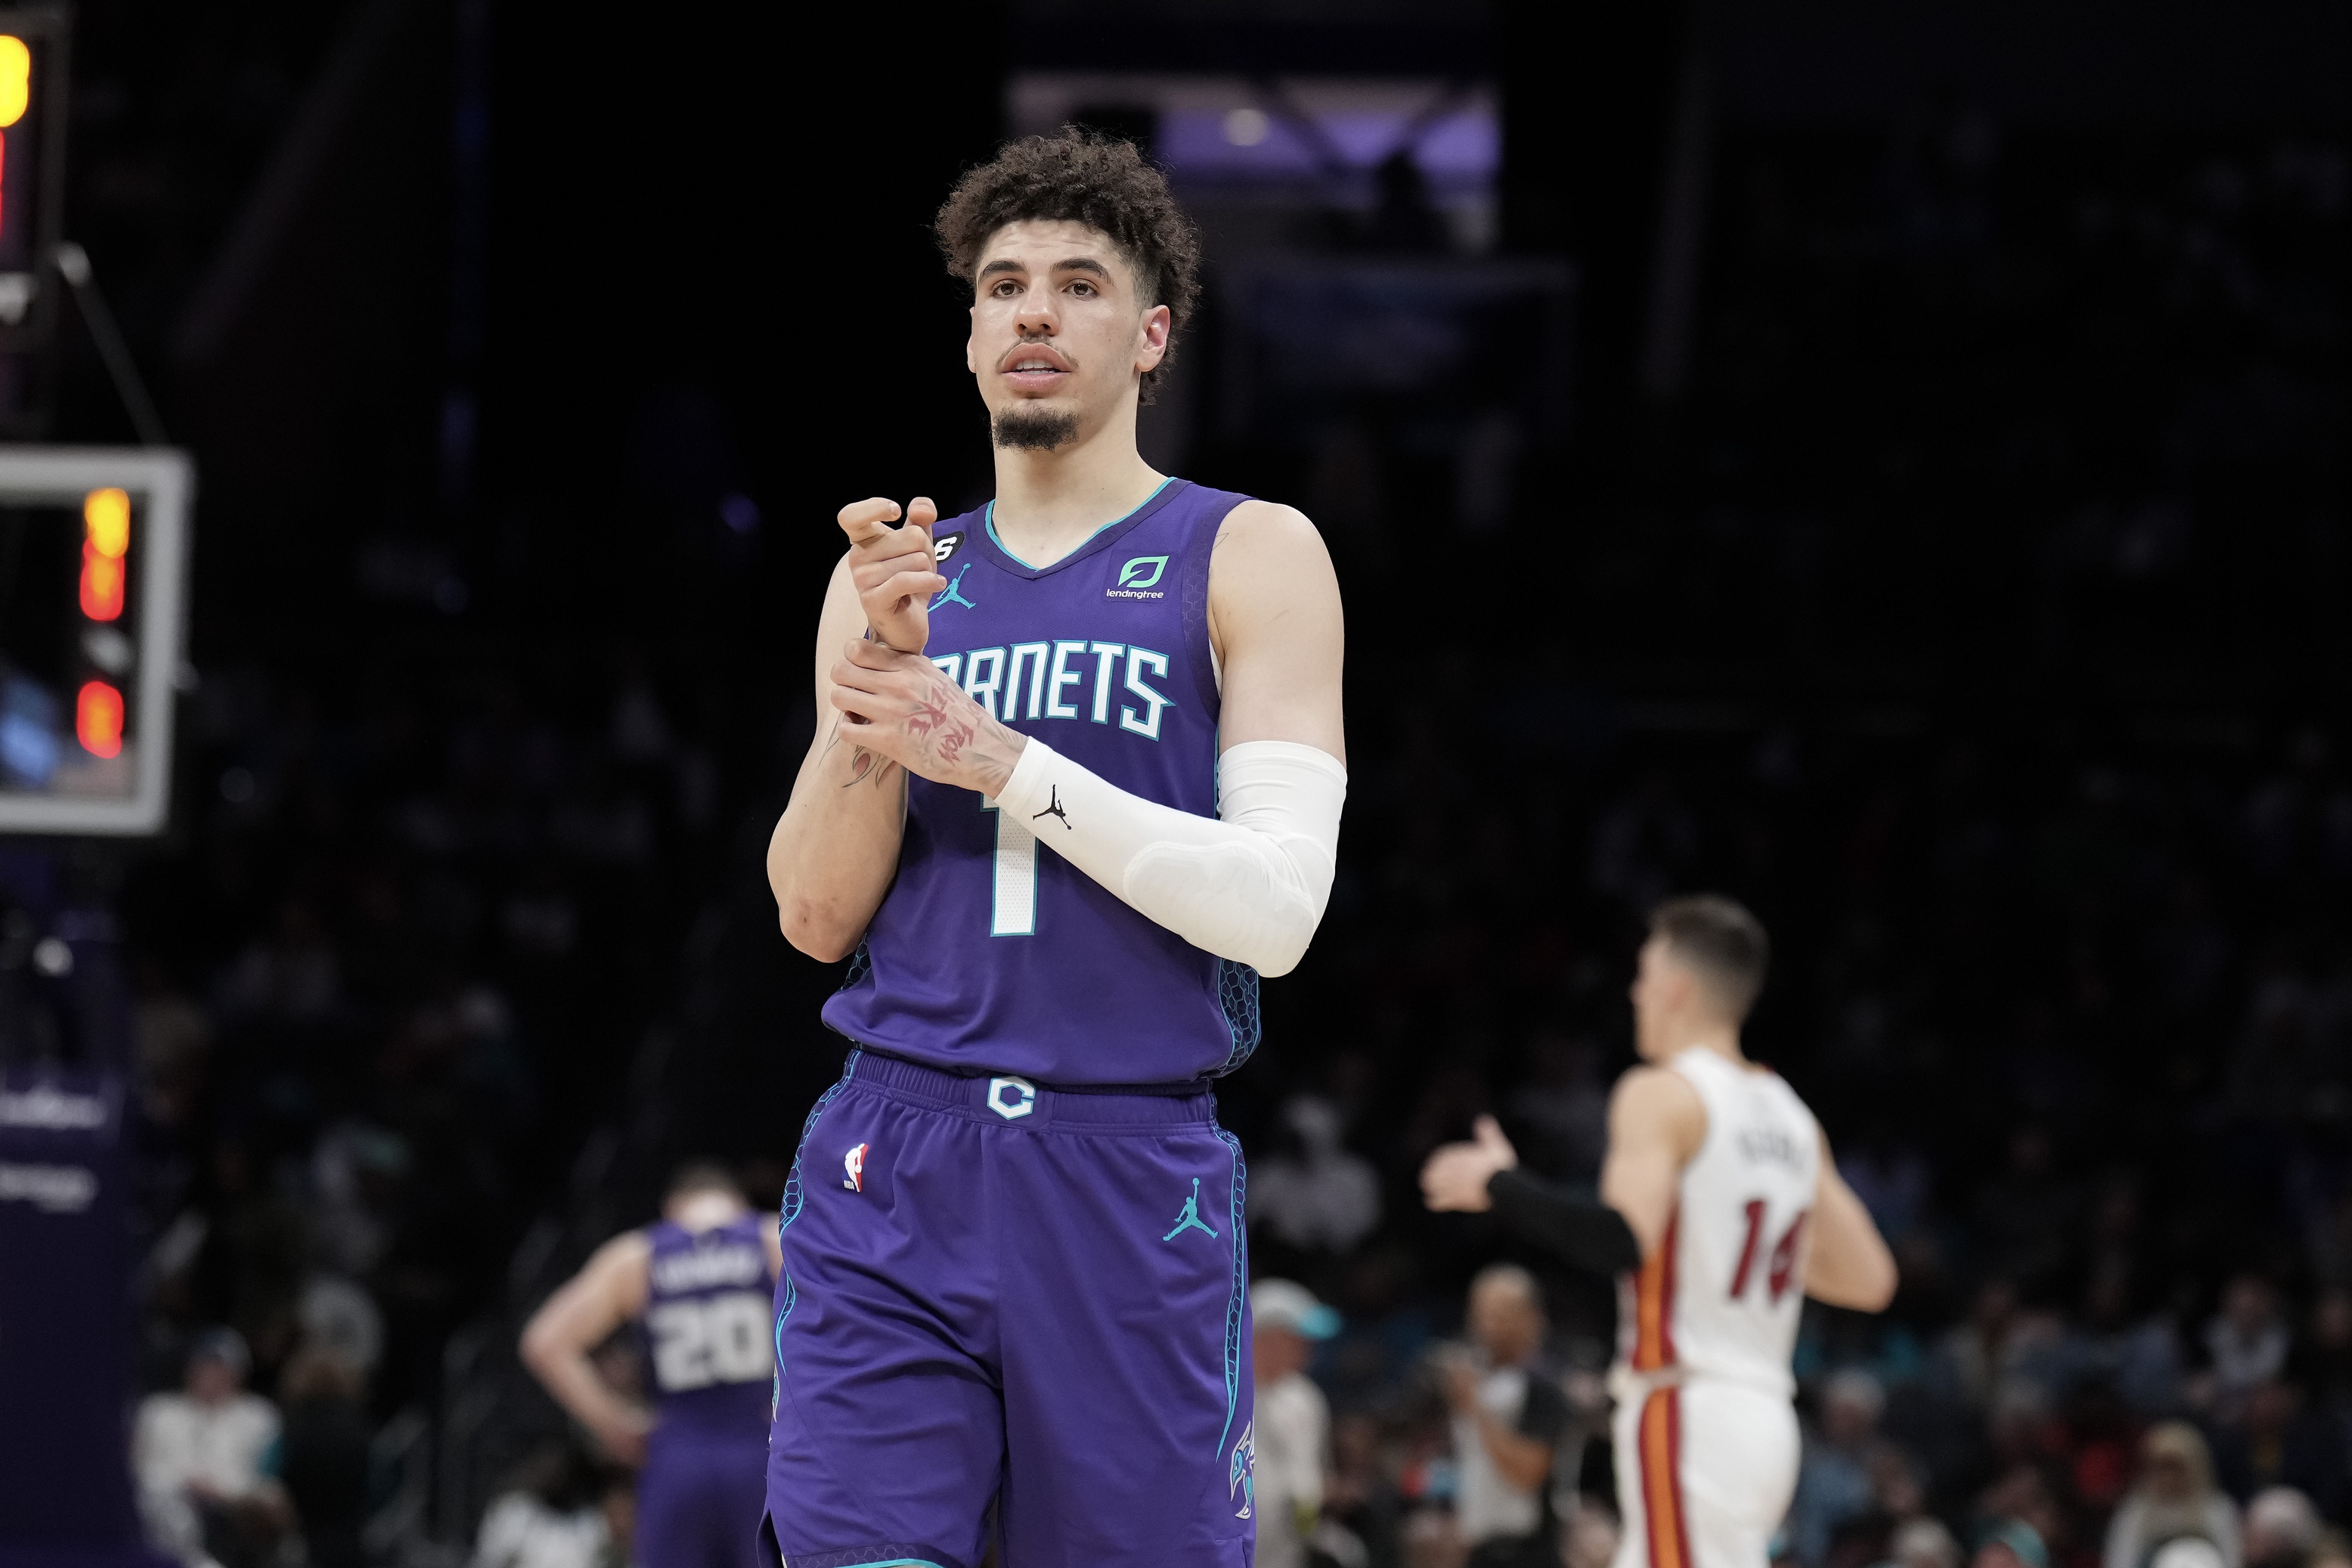 Charlotte Hornets at Los Angeles Lakers odds, picks and prediction